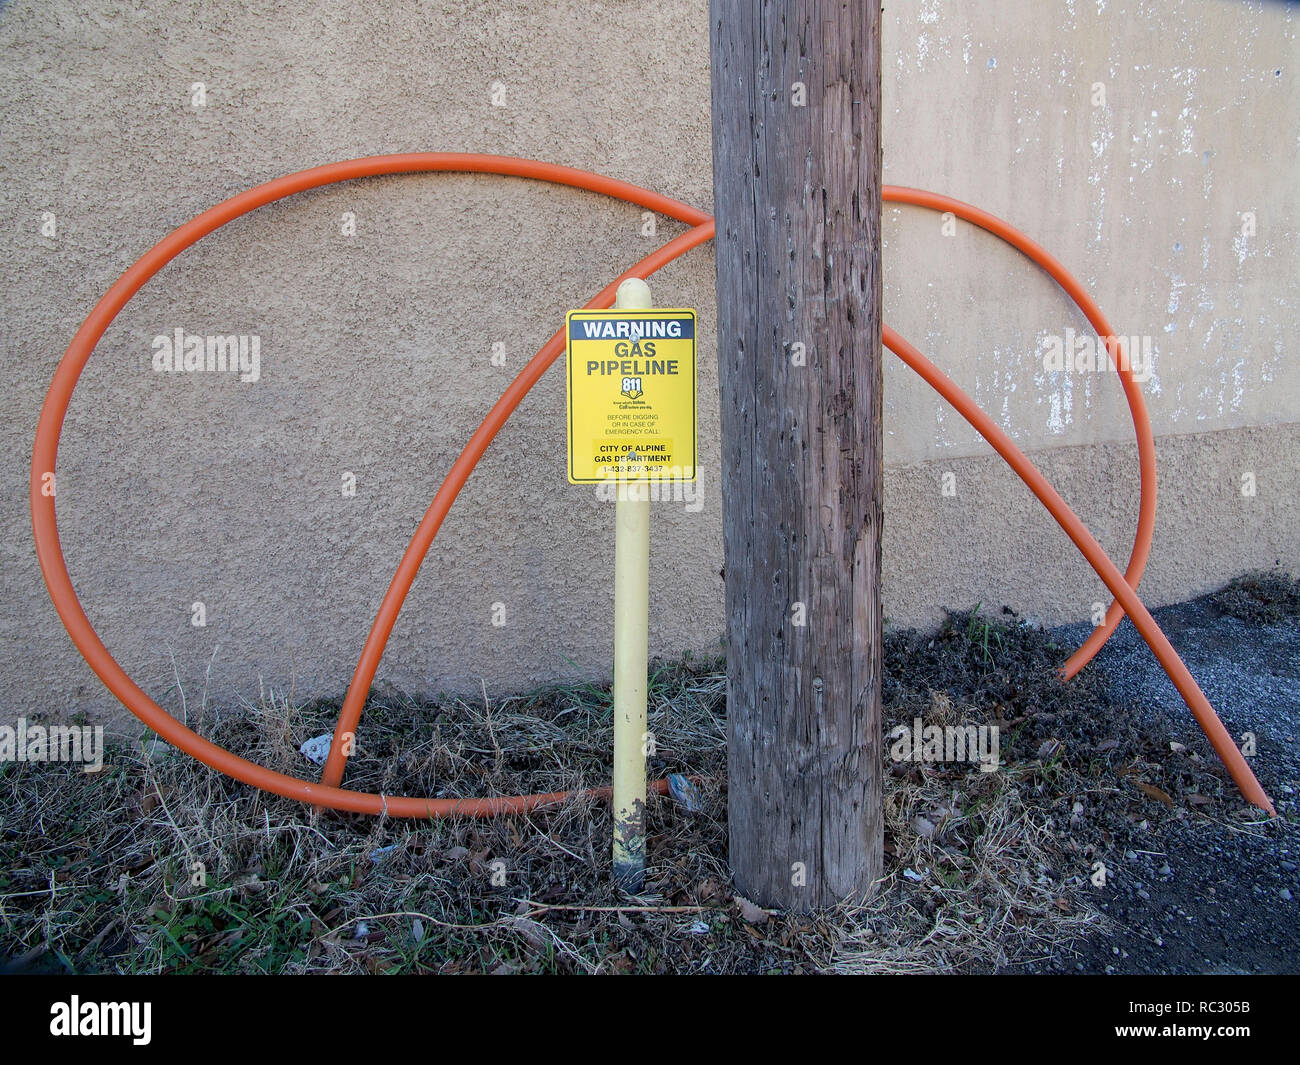 Warning about buried gas line next to an above ground electric wire conduit Stock Photo